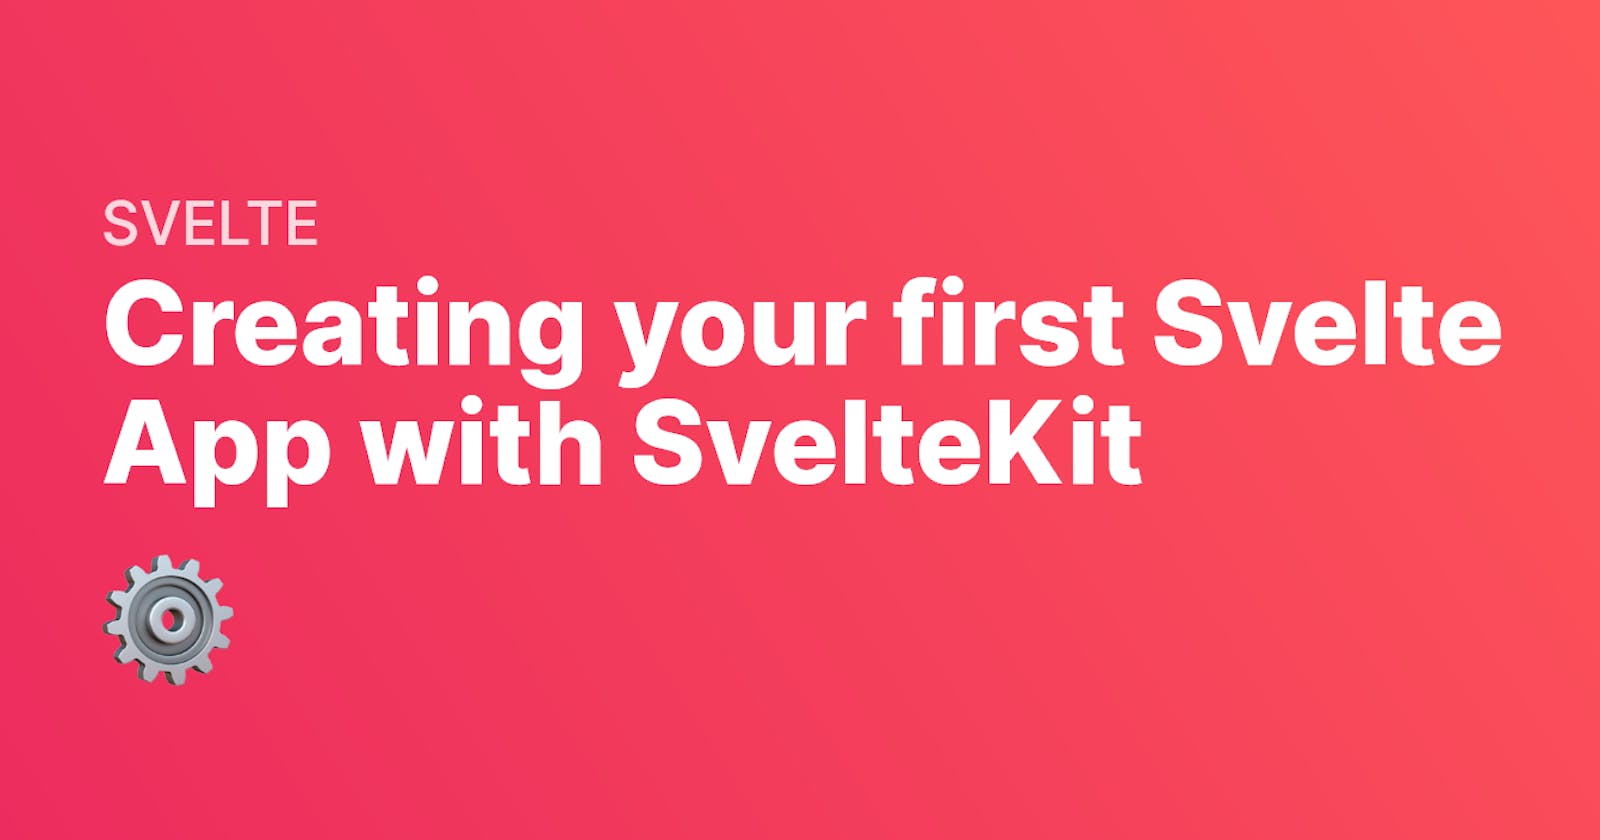 Creating your first Svelte App with SvelteKit